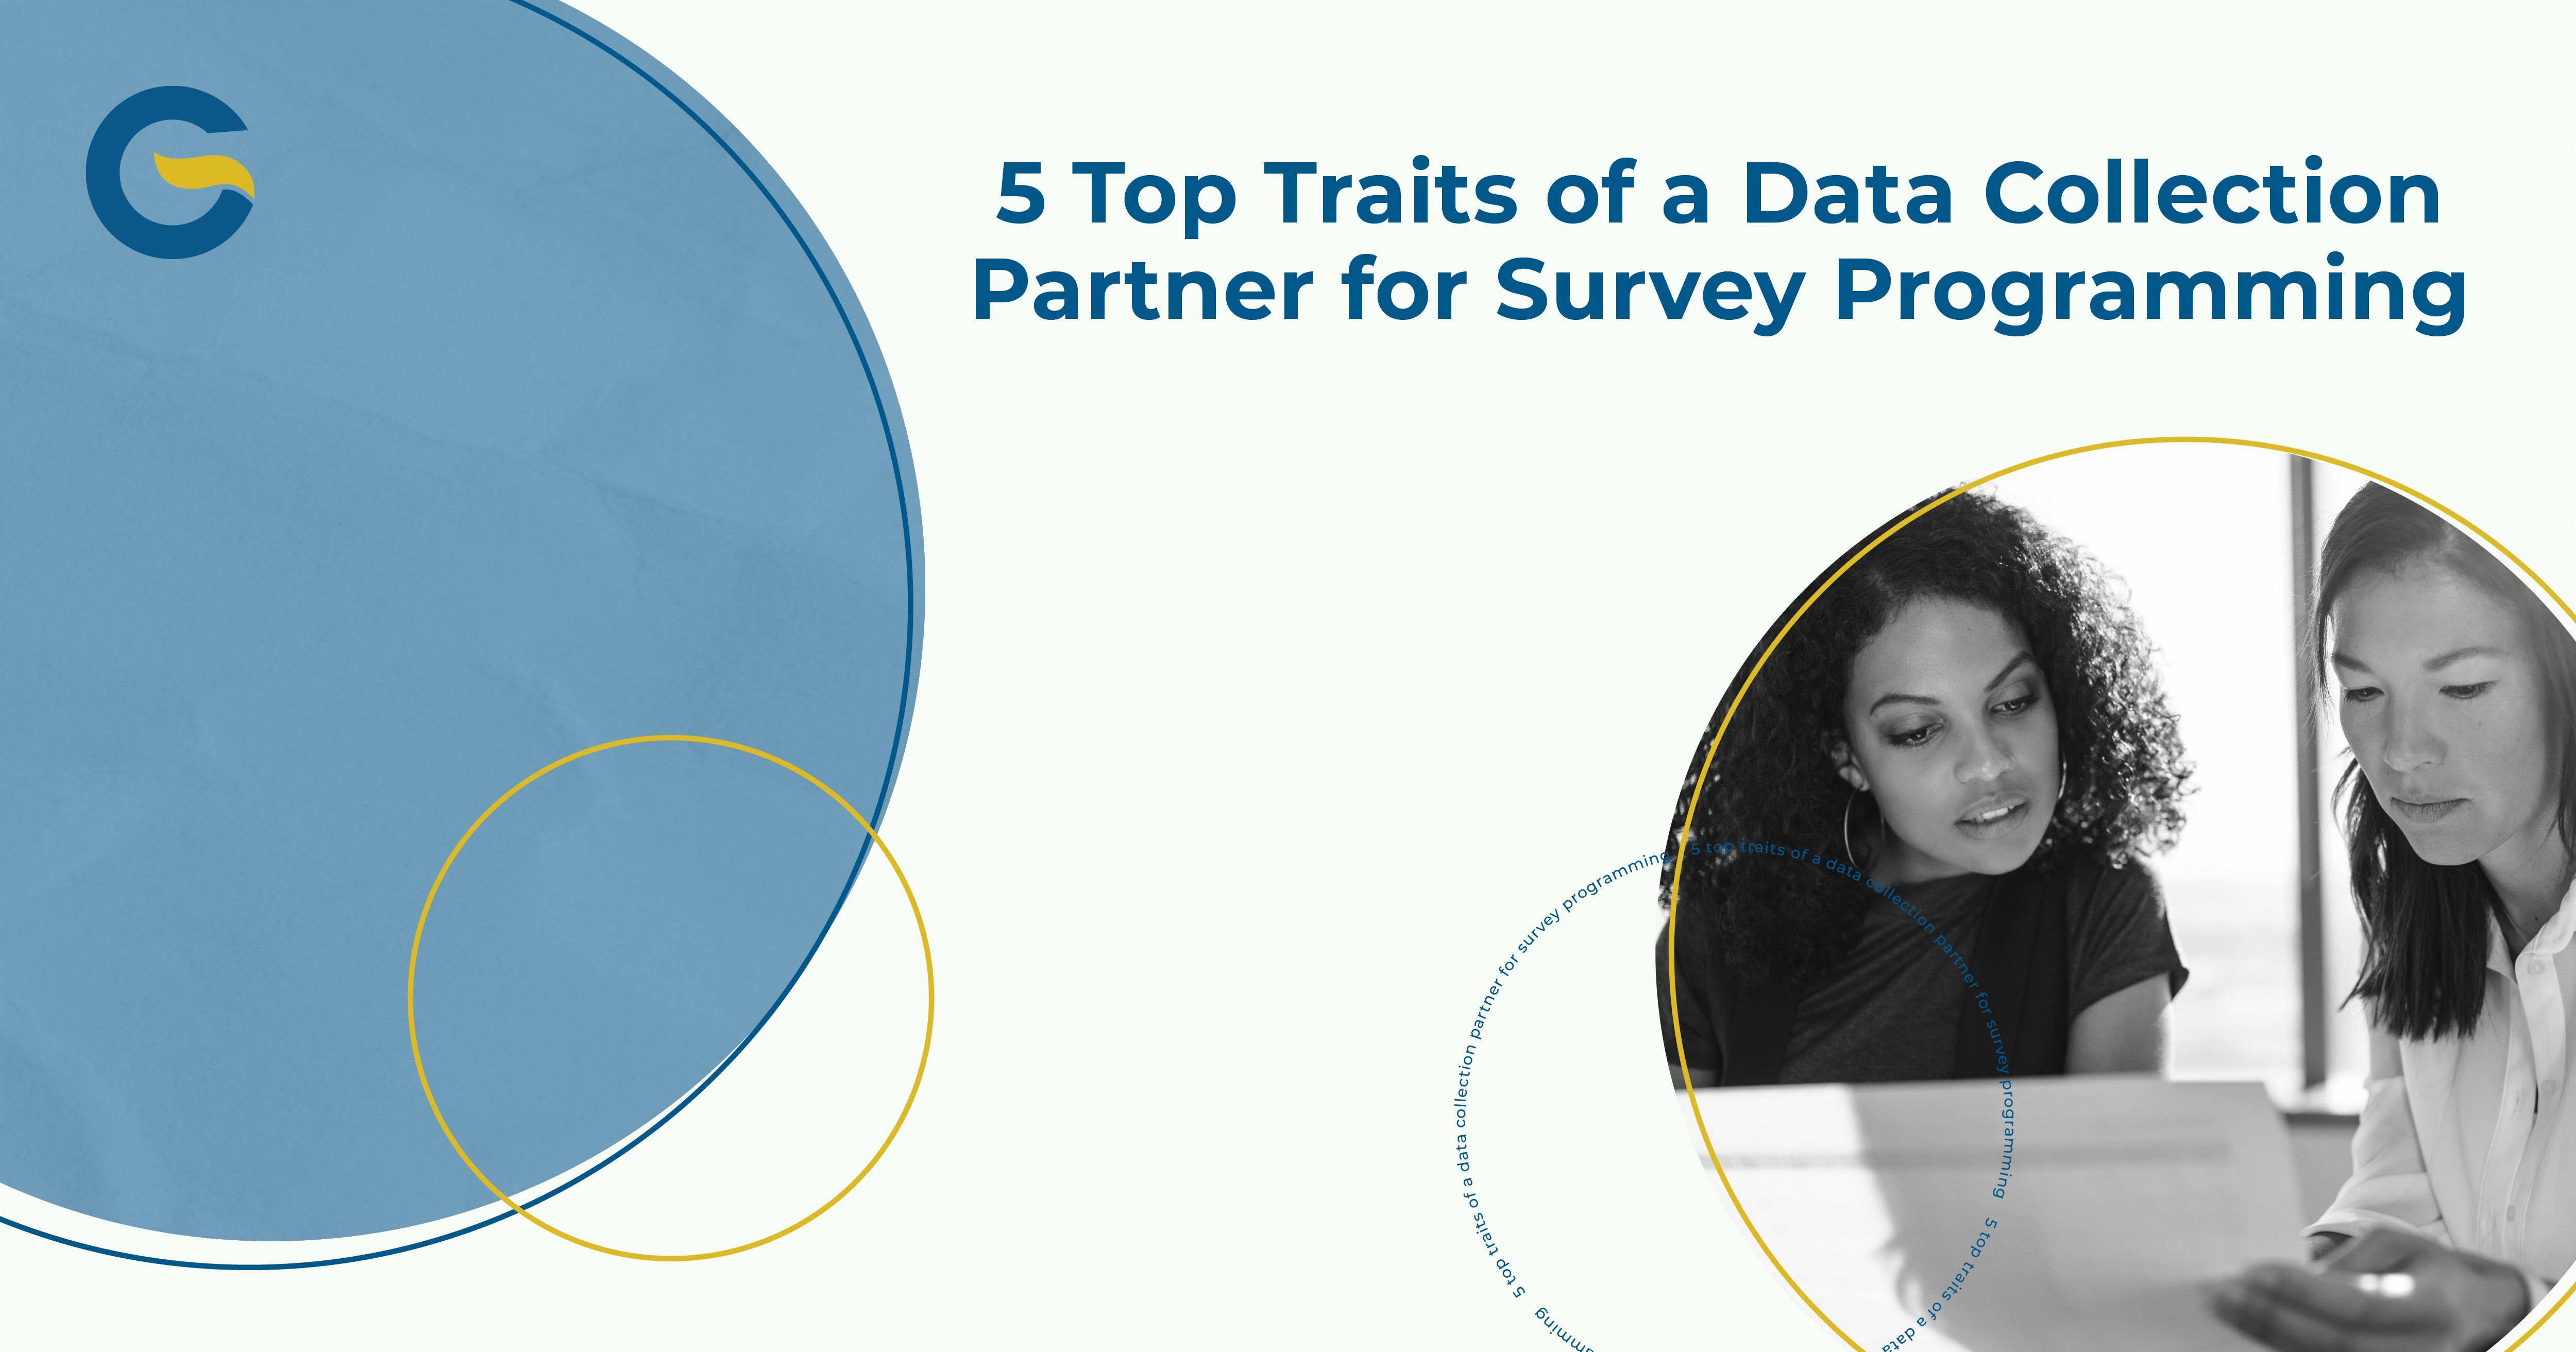 5 Top Traits of a Data Collection Partner for Survey Programming Image